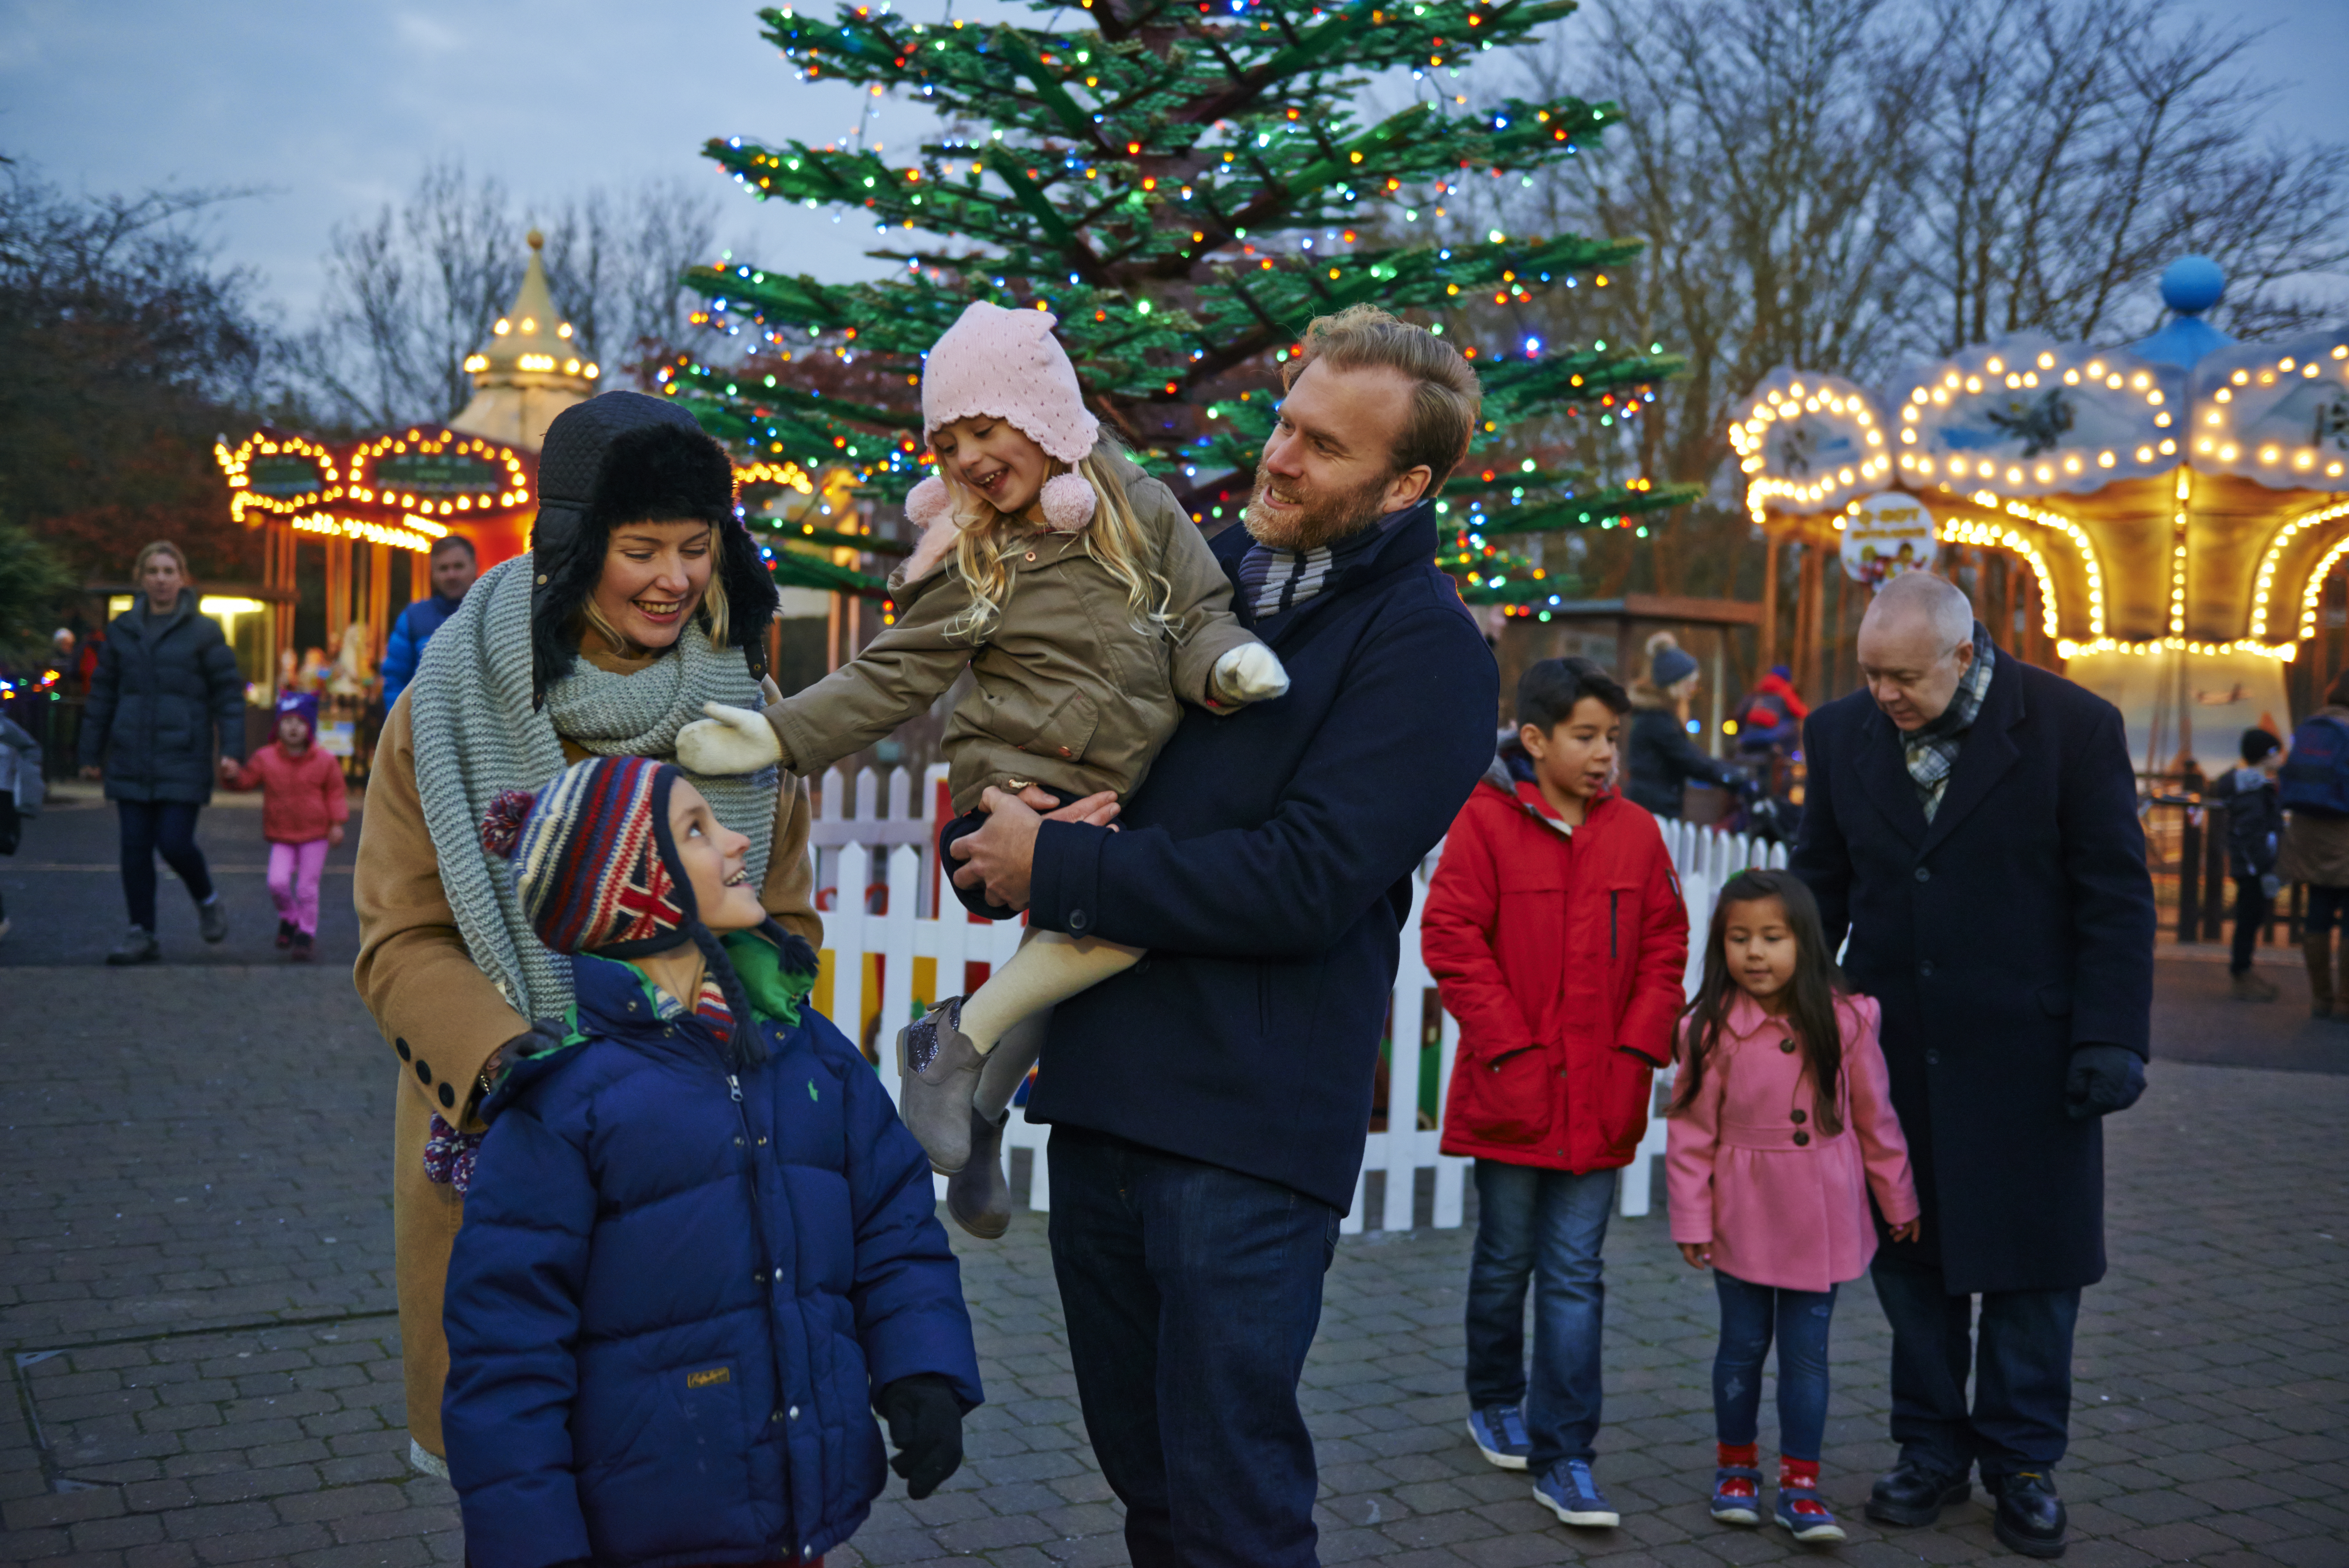 Families in front of Christmas trees at LEGOLAND at Christmas at the LEGOLAND Windsor Resort